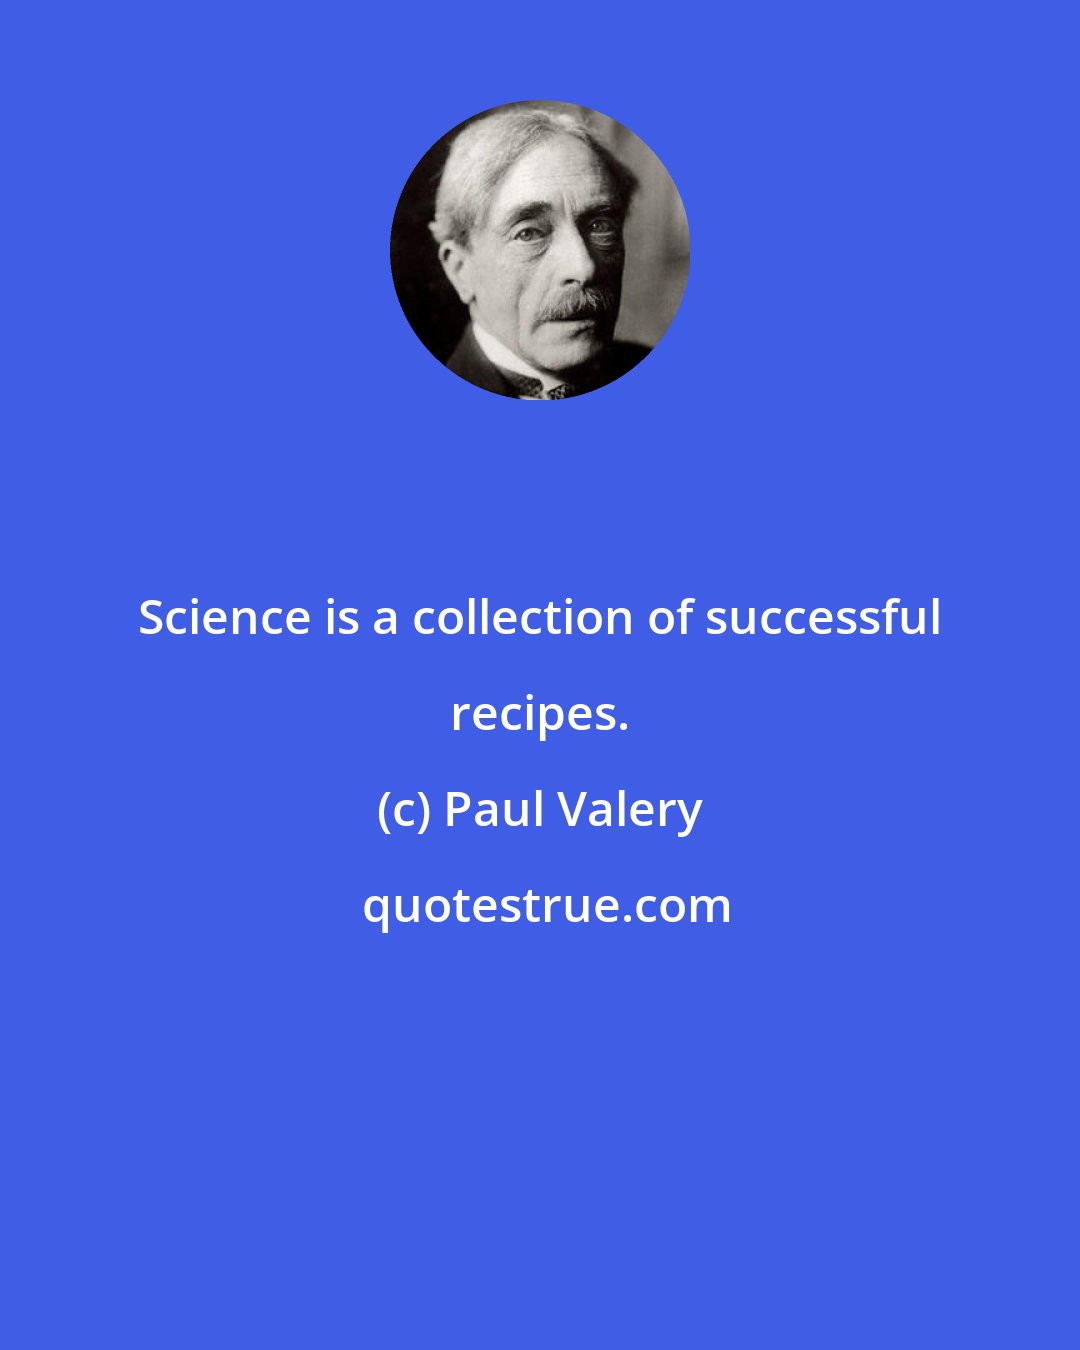 Paul Valery: Science is a collection of successful recipes.